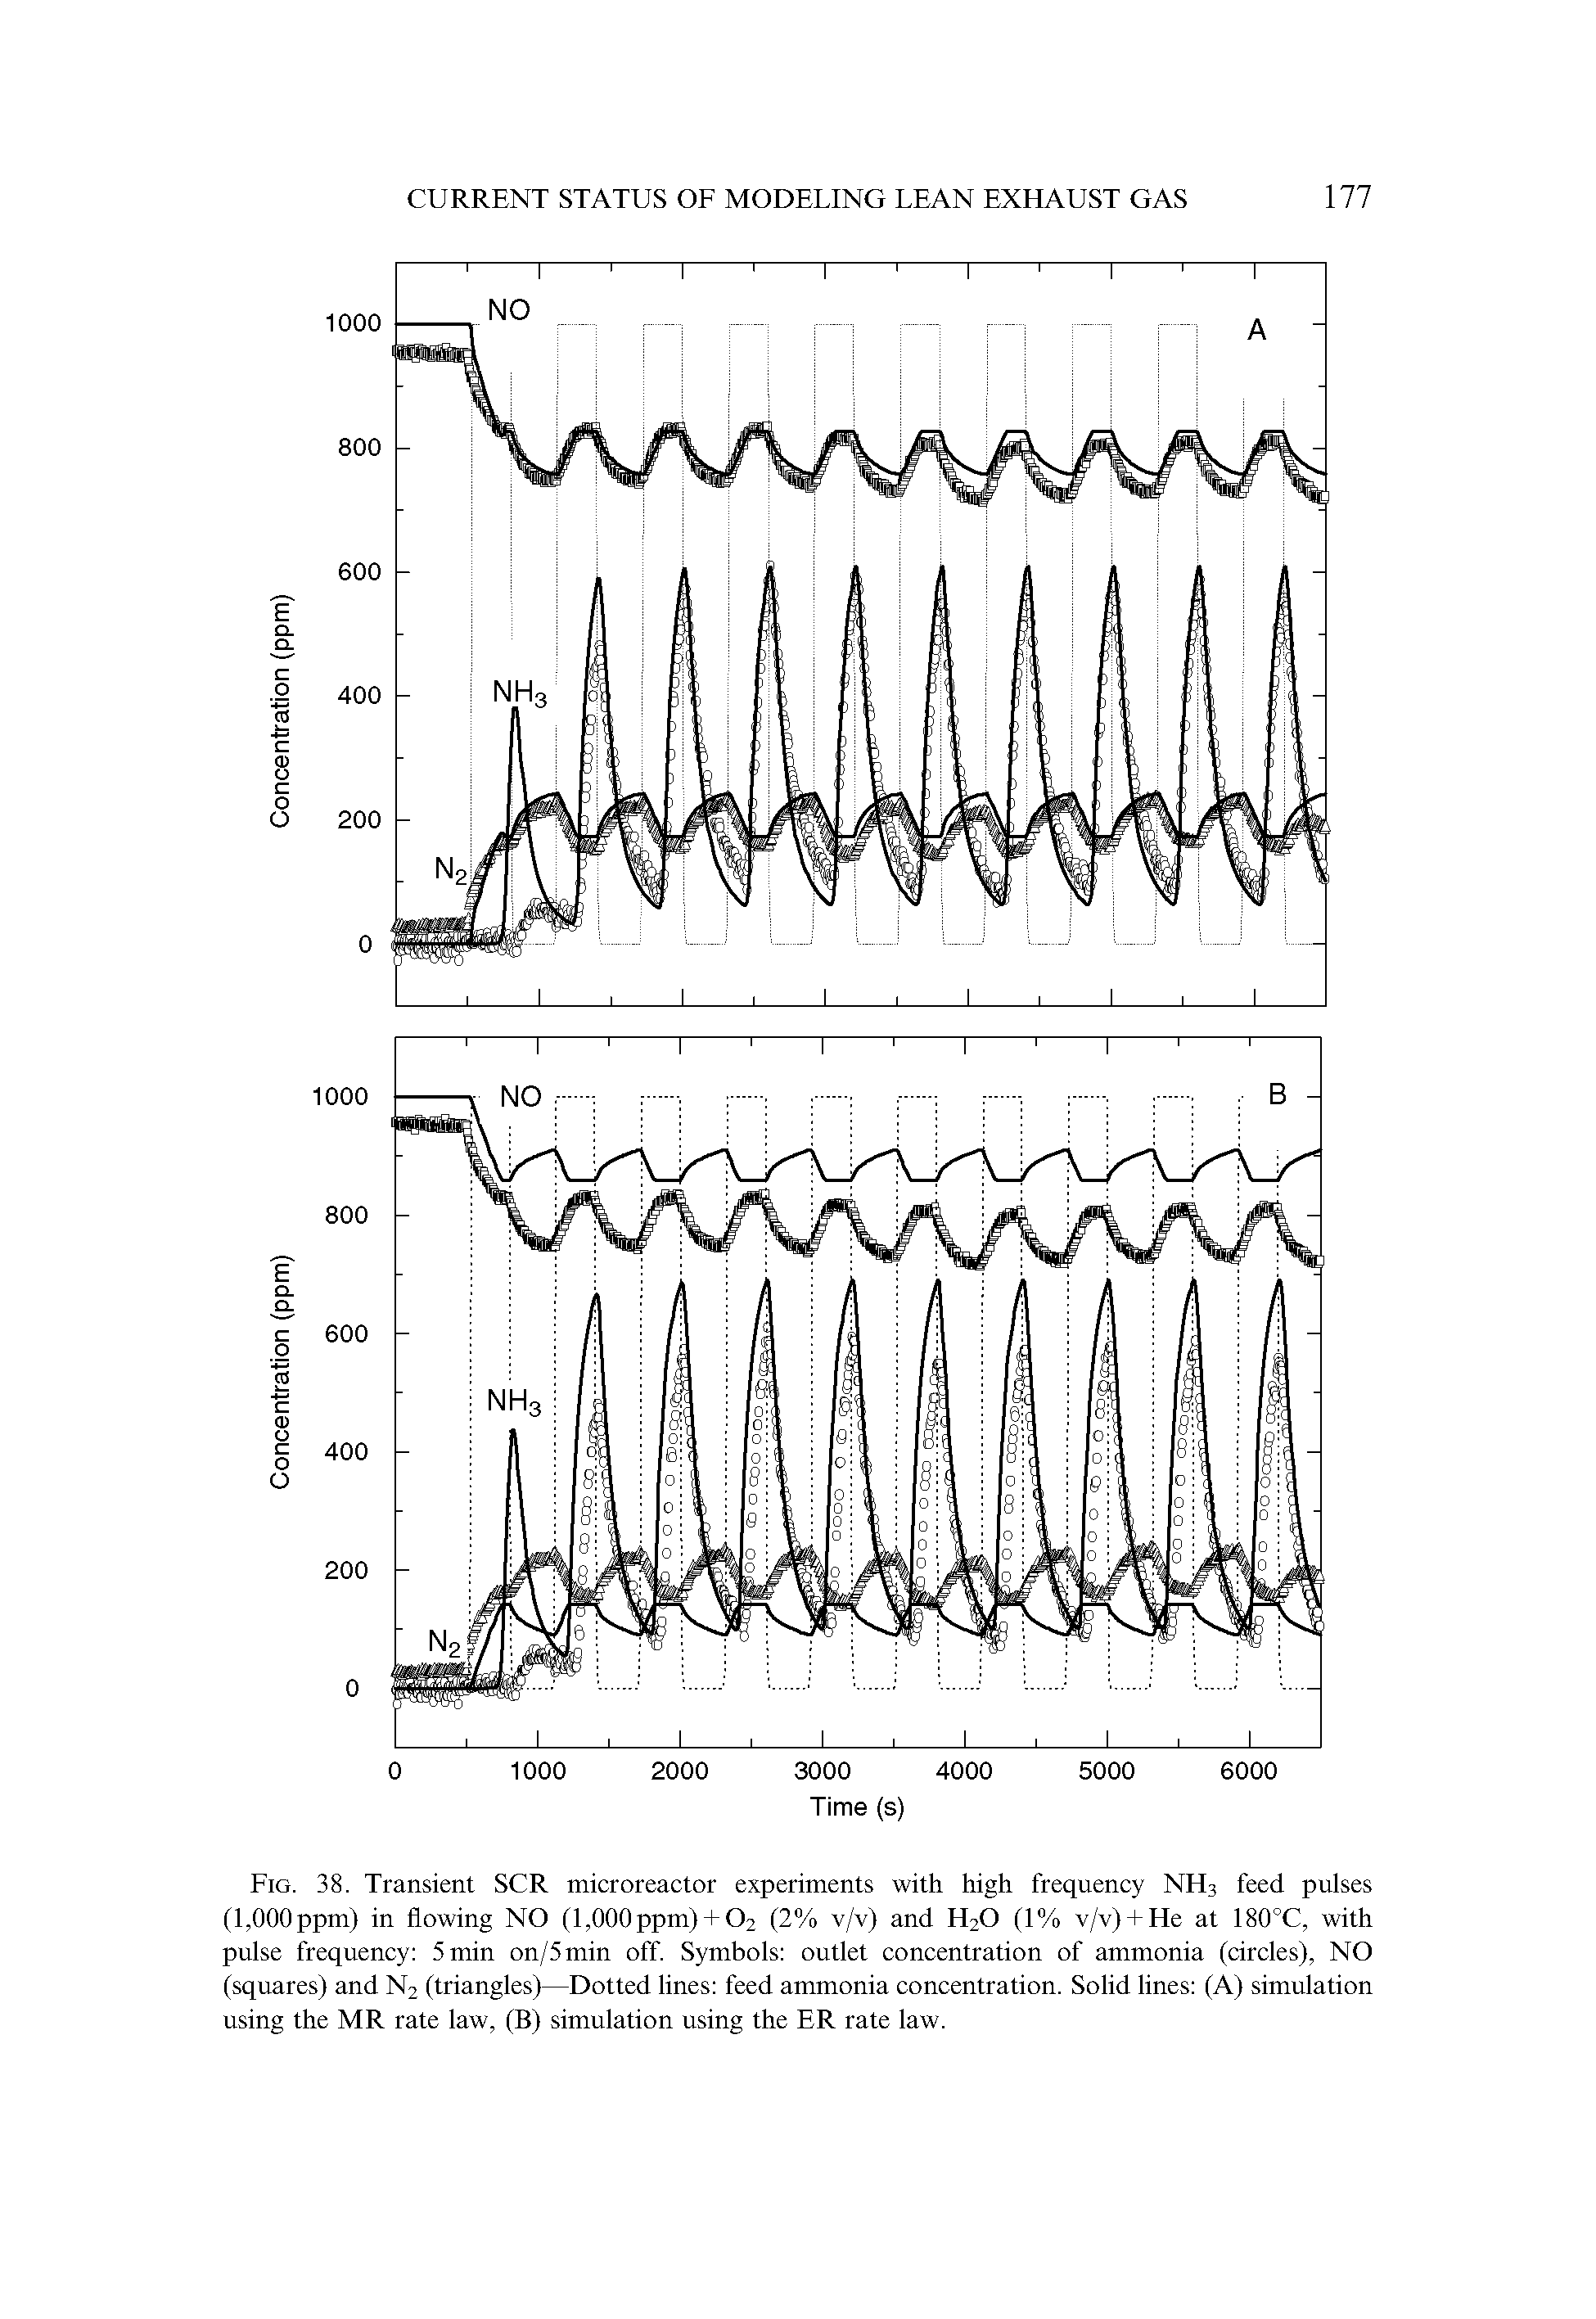 Fig. 38. Transient SCR microreactor experiments with high frequency NH3 feed pulses (l,000ppm) in flowing NO (l,000ppm) + 02 (2% v/v) and H20 (1% v/v) + He at 180°C, with pulse frequency 5min on/5min off. Symbols outlet concentration of ammonia (circles), NO (squares) and N2 (triangles)—Dotted lines feed ammonia concentration. Solid lines (A) simulation using the MR rate law, (B) simulation using the ER rate law.